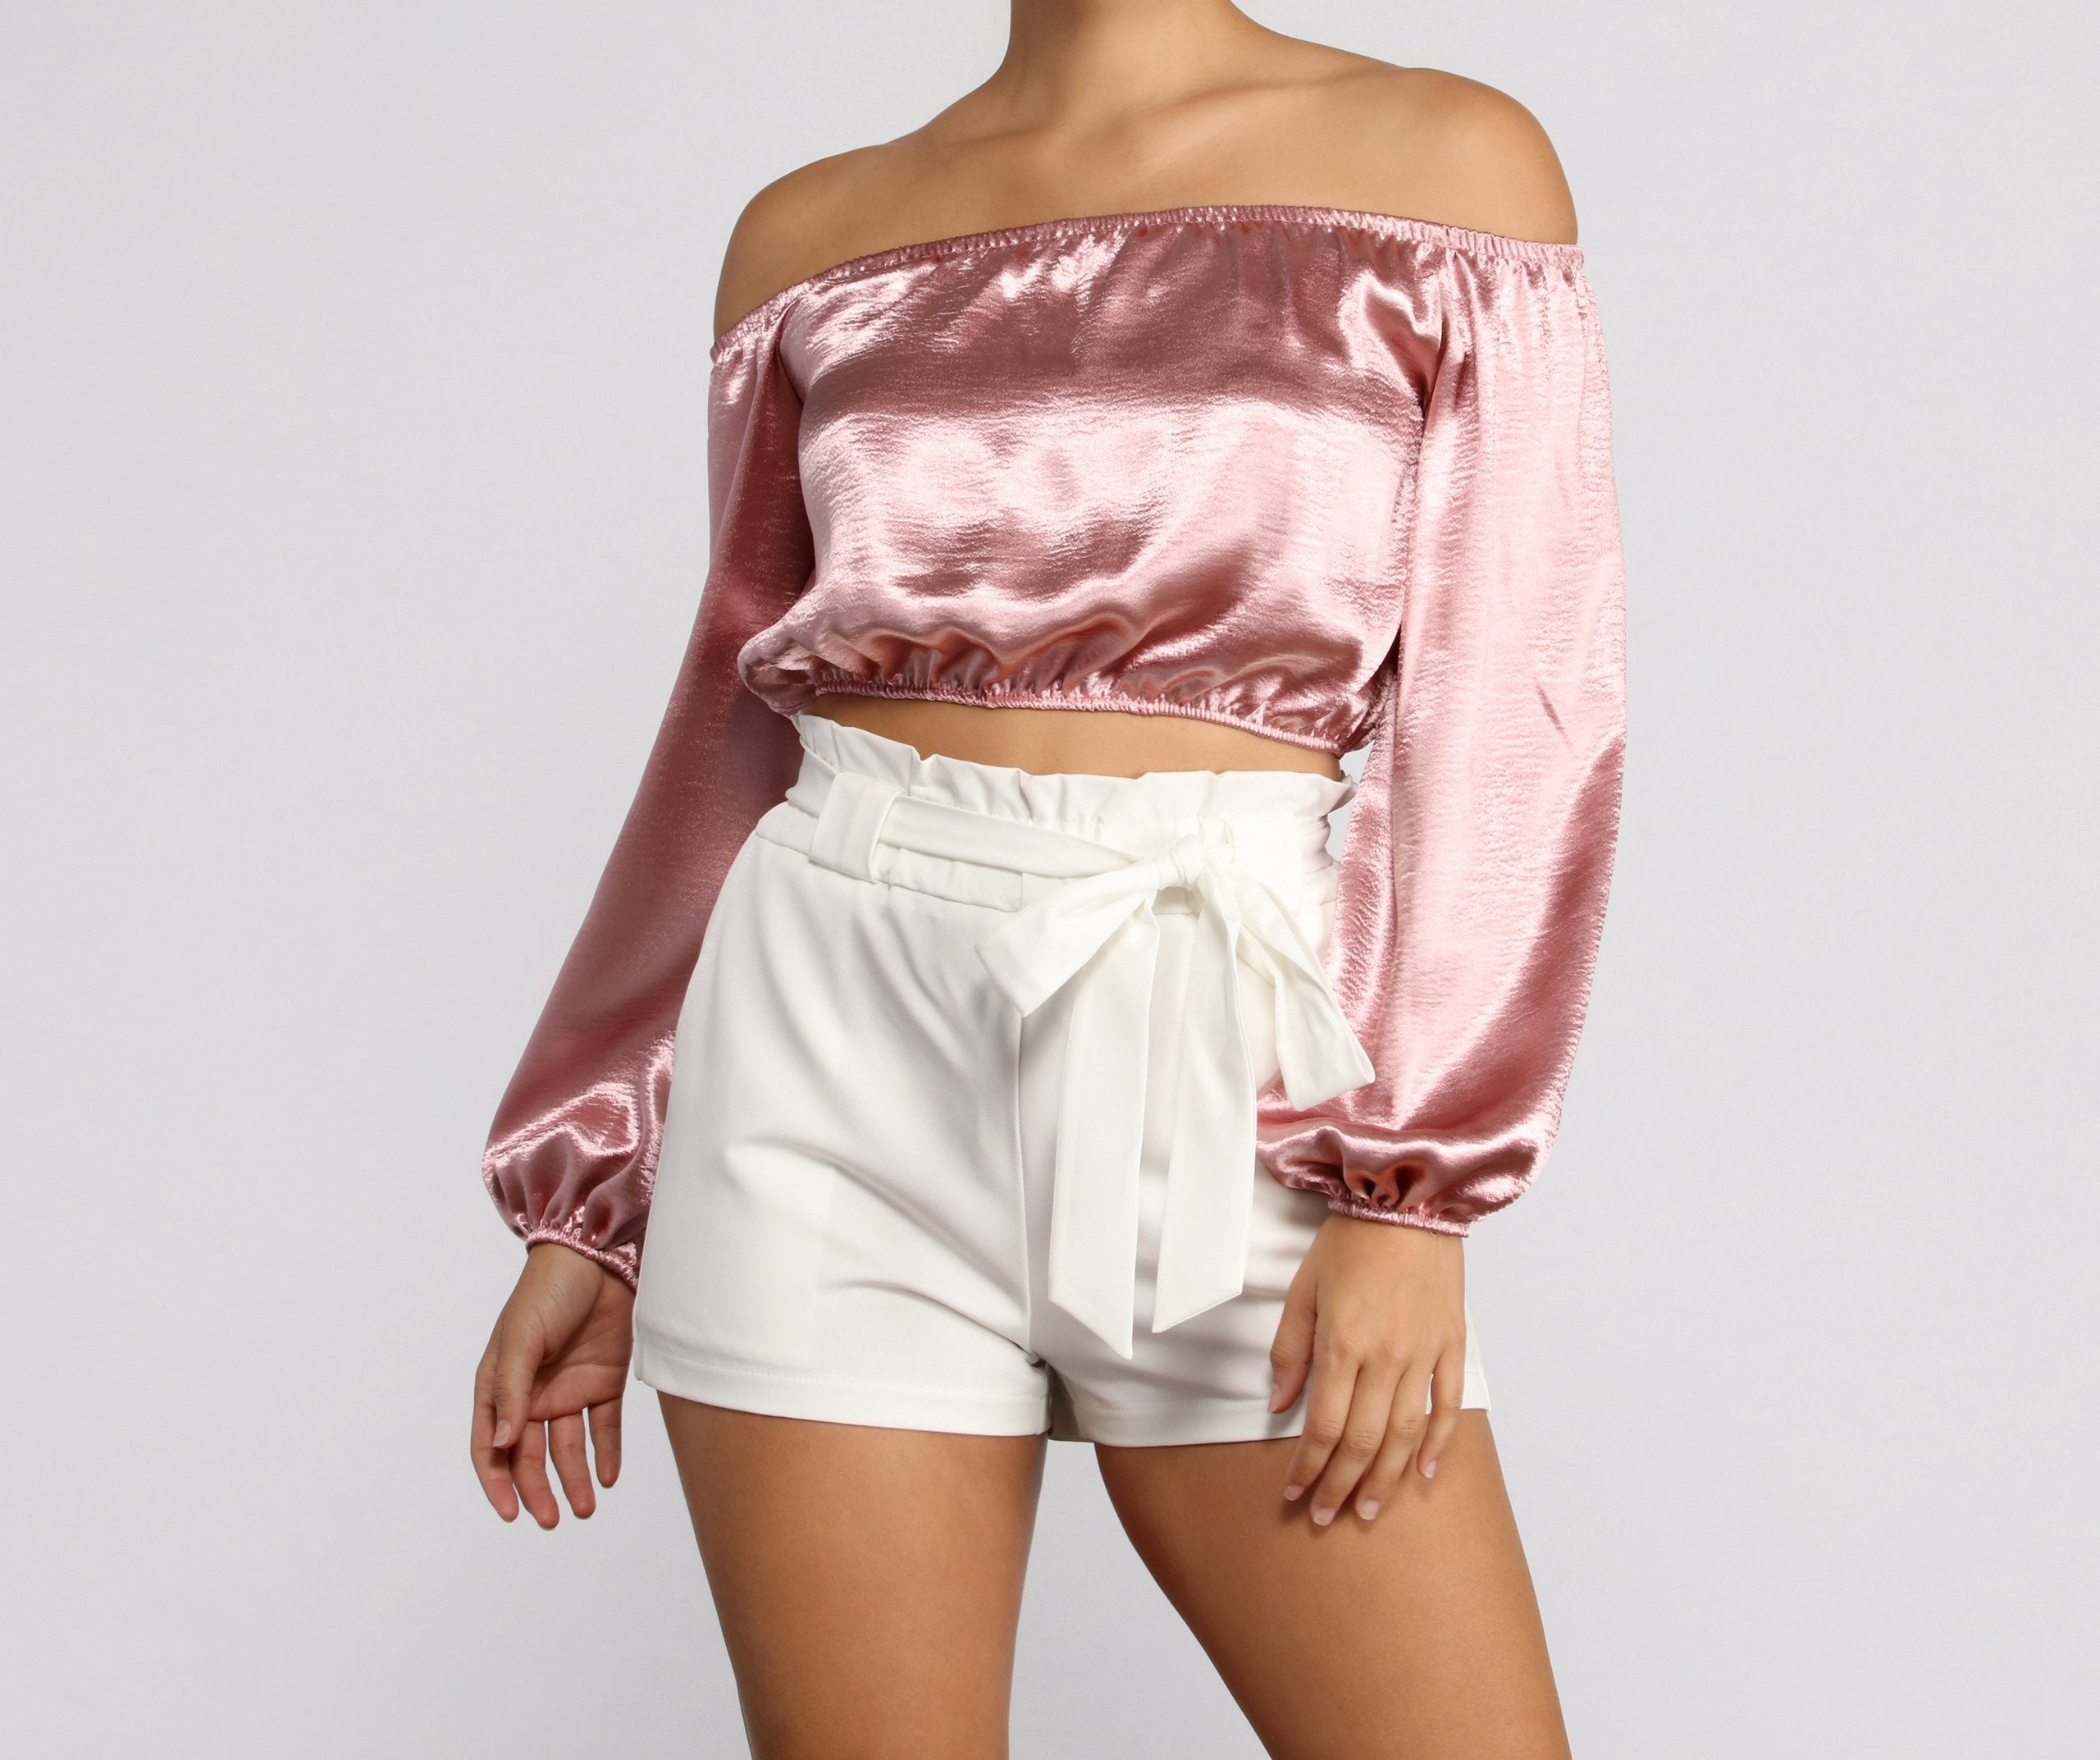 Stunning Sophistication Satin Crop Top - Lady Occasions